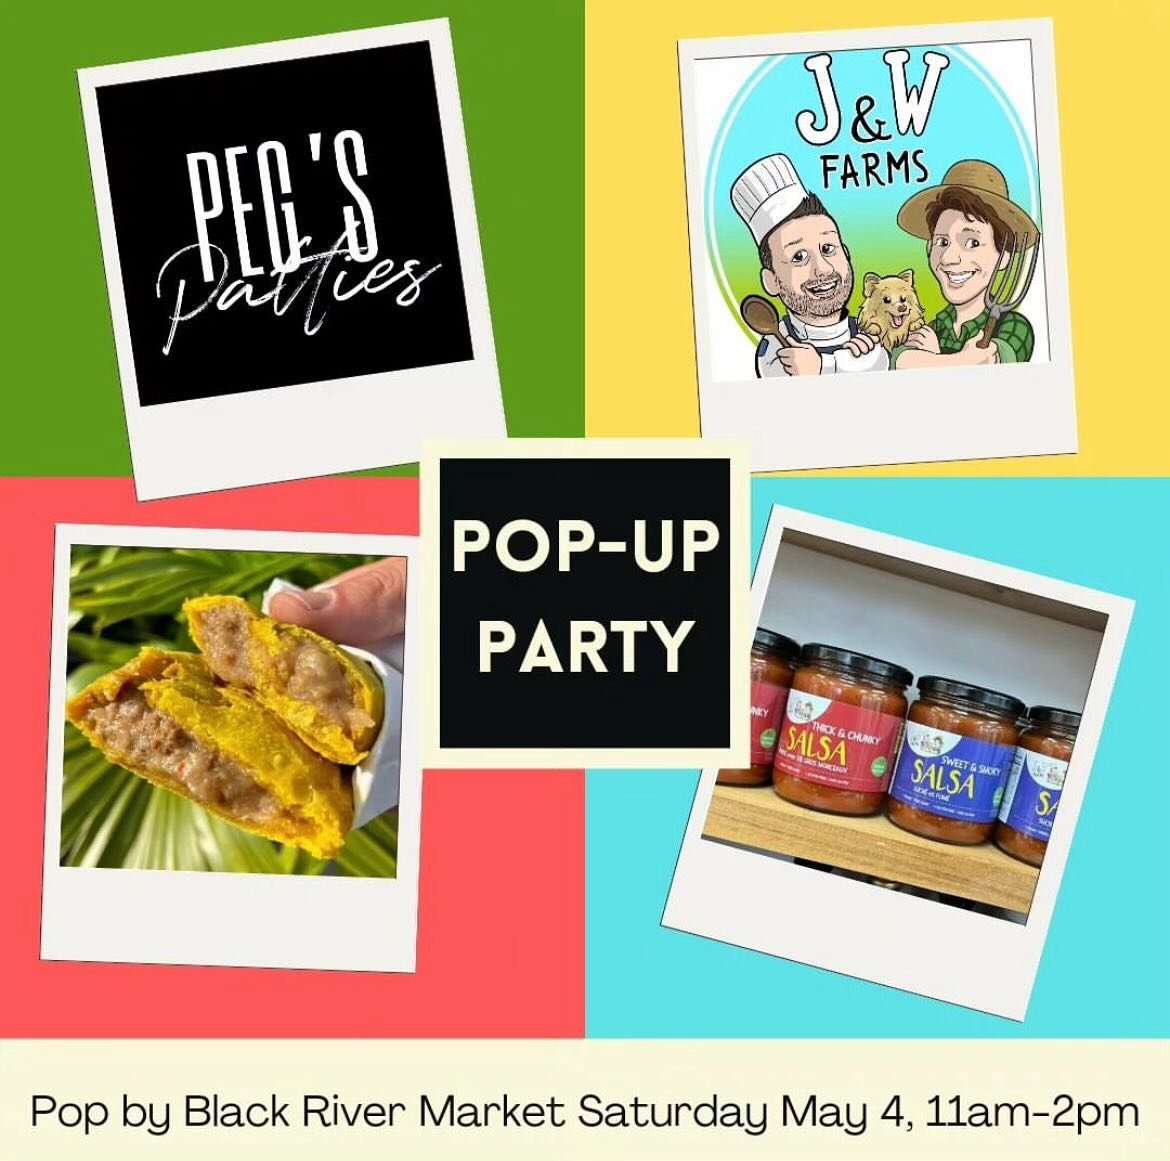 This SATURDAY, May 4th we will be at @blackriverpec with our friends @pegspatties to share some delicious local food with you all! Come shop local, grab some dips &amp; salsas for 5 de mayo, delicious jamaican patties and try Cliff&rsquo;s latest gel